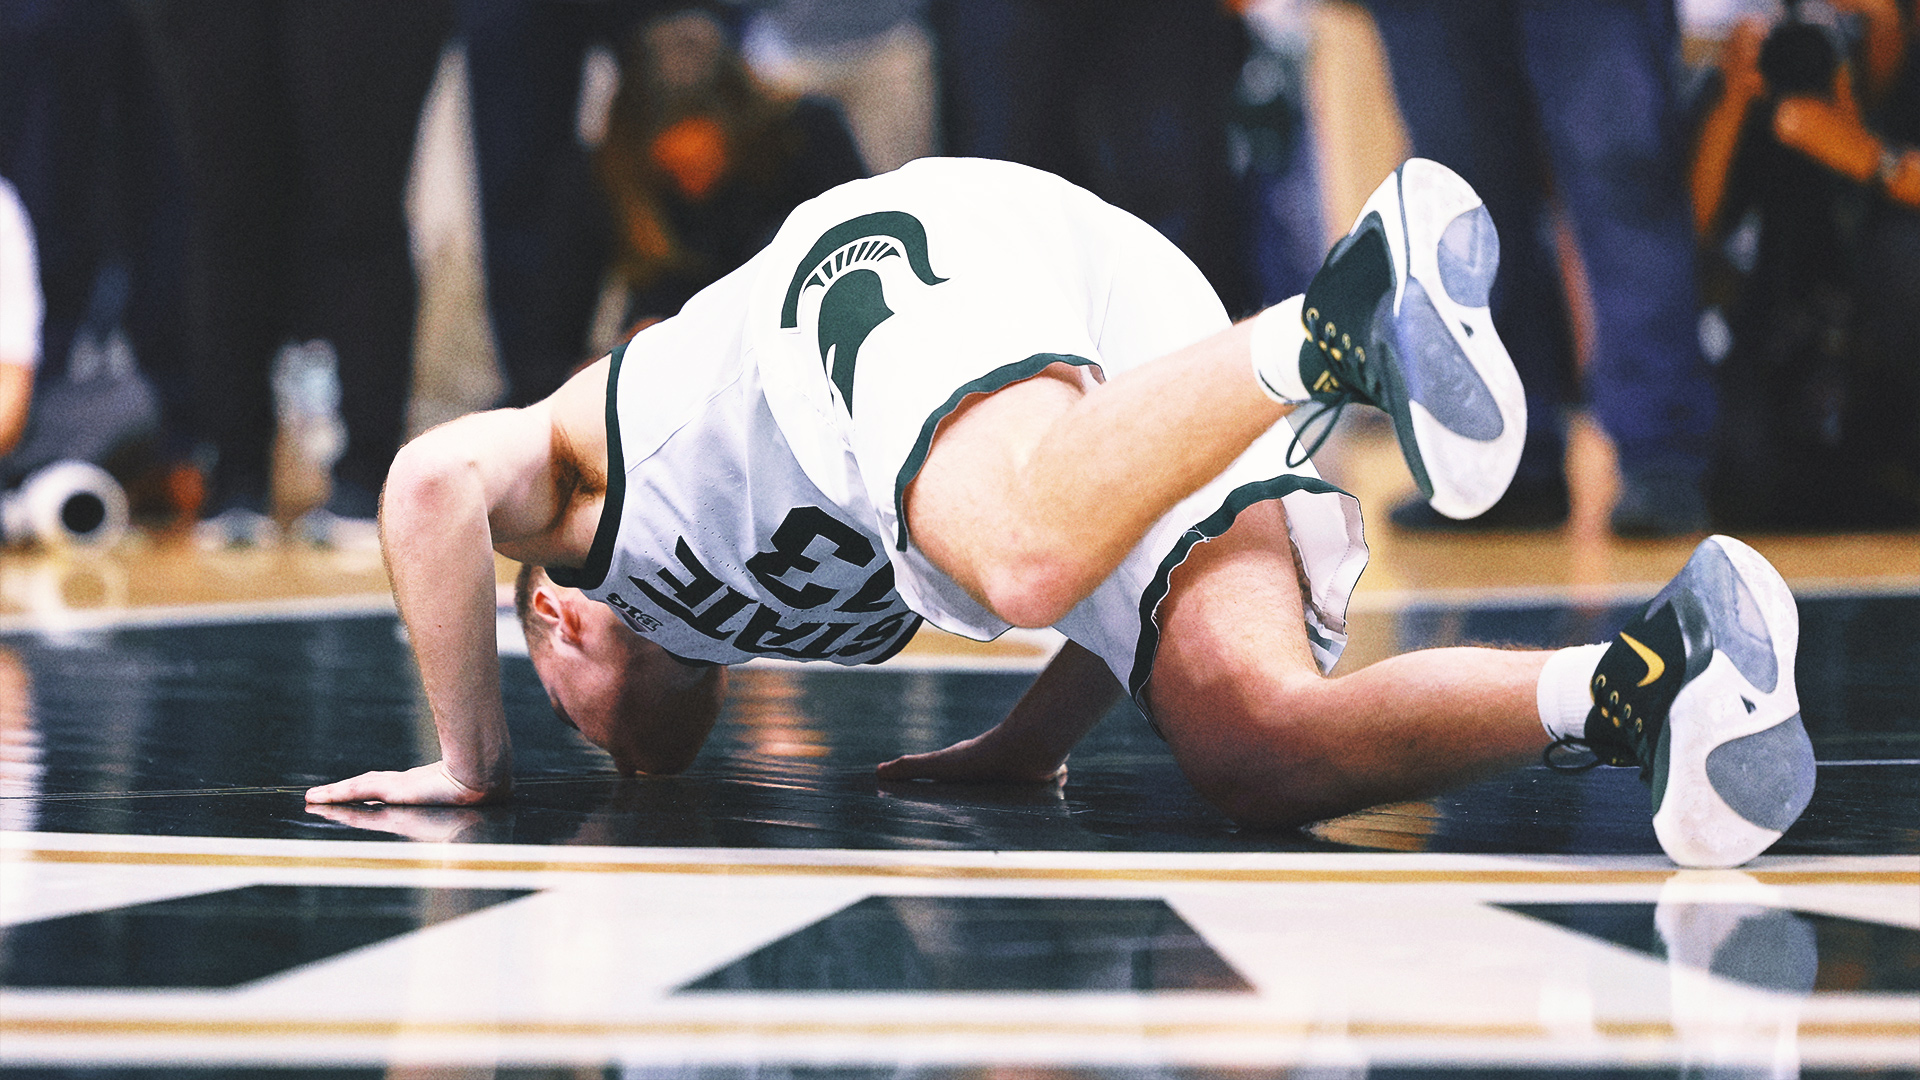 Tom Izzo's son, Steven, suits up for last home game at Michigan State in 53-49 win over Northwestern